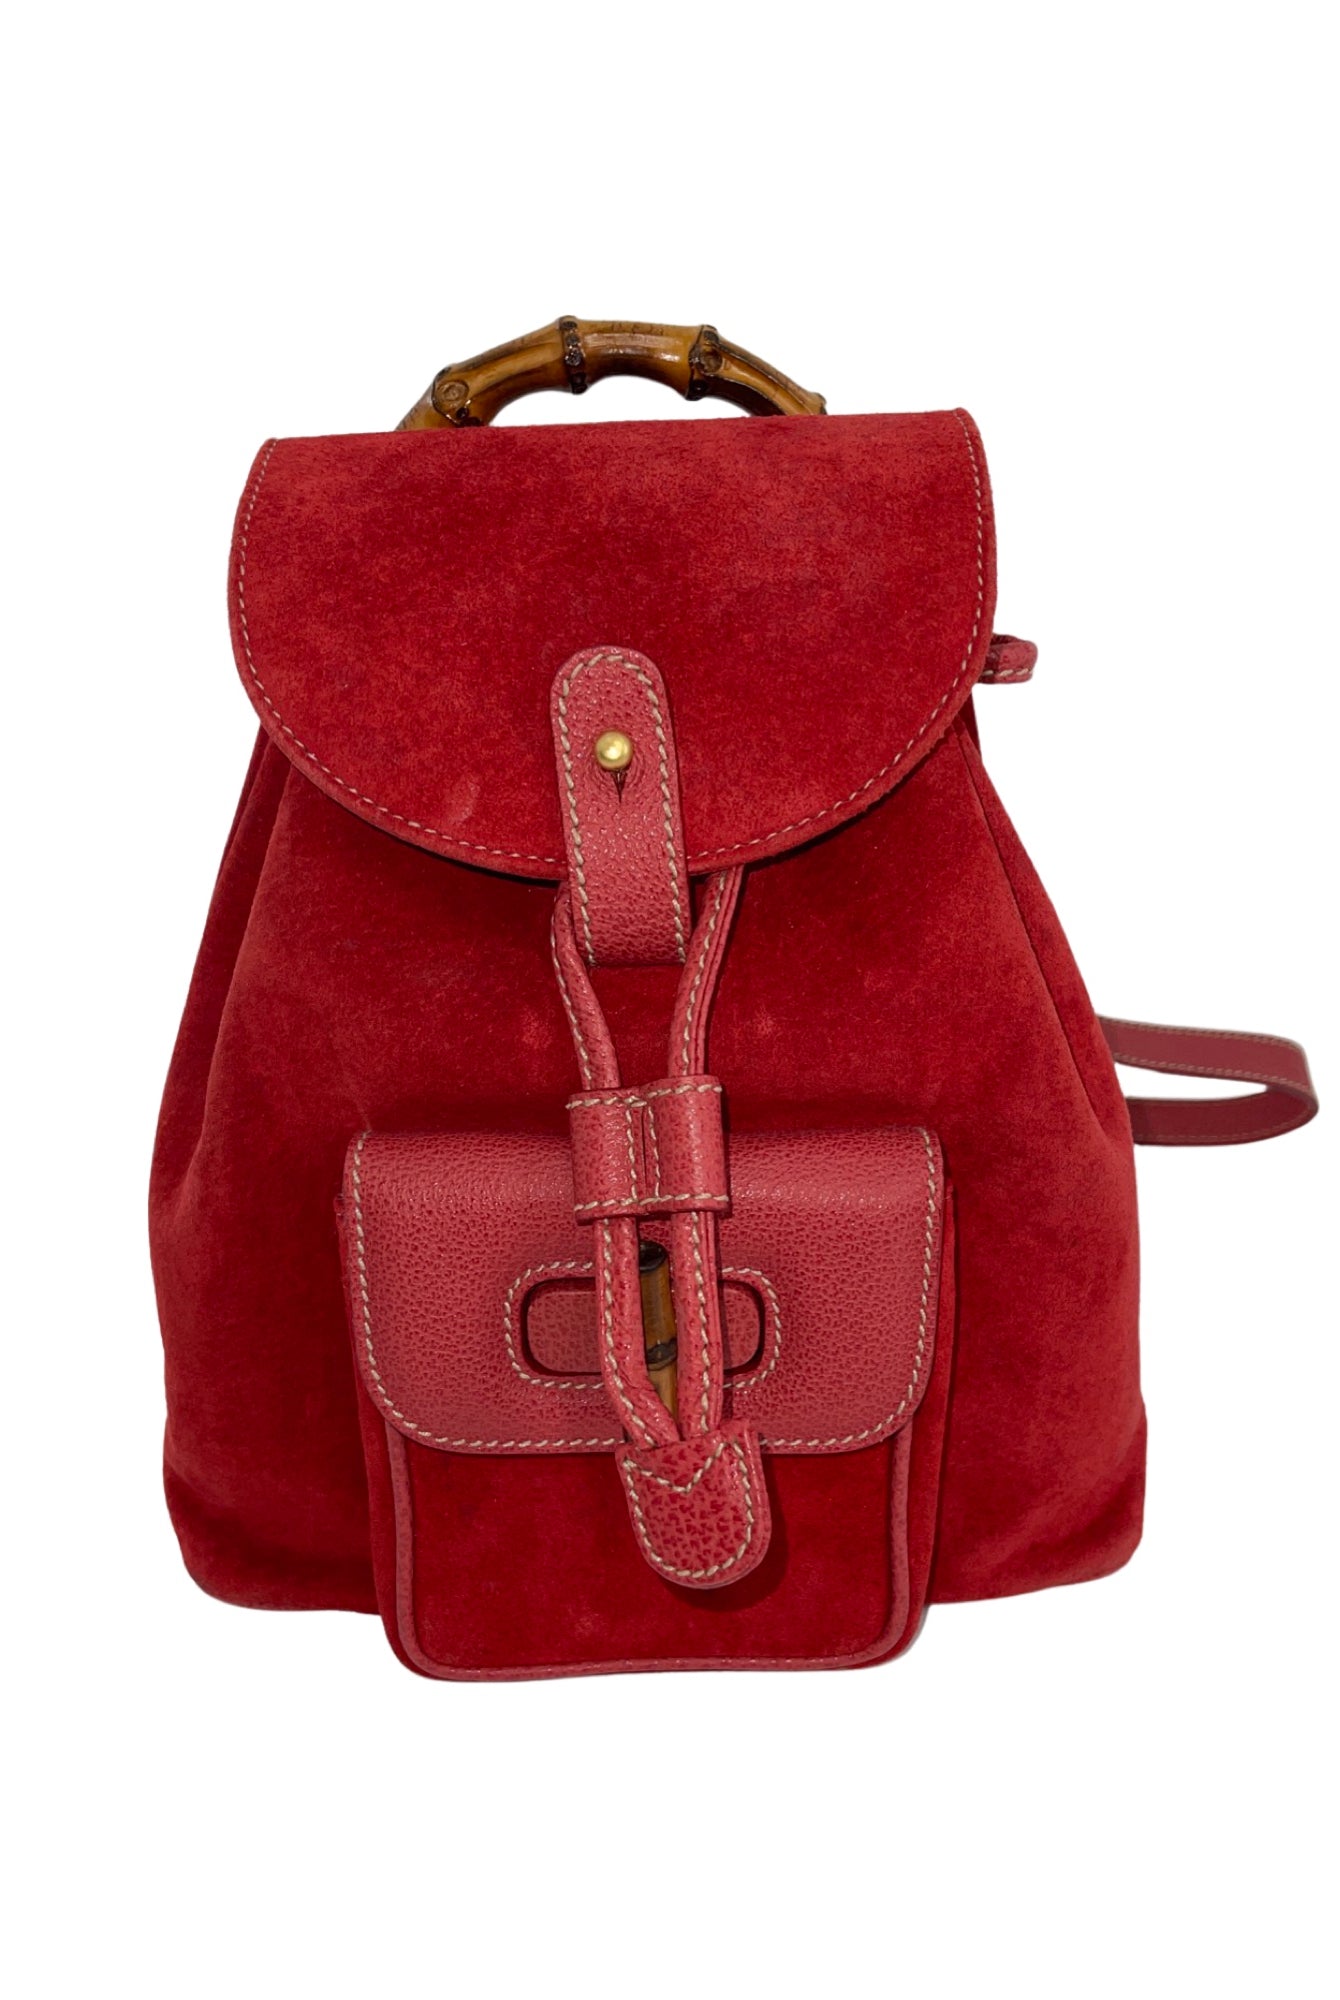 GUCCI Vintage Mini Bamboo Suede Backpack